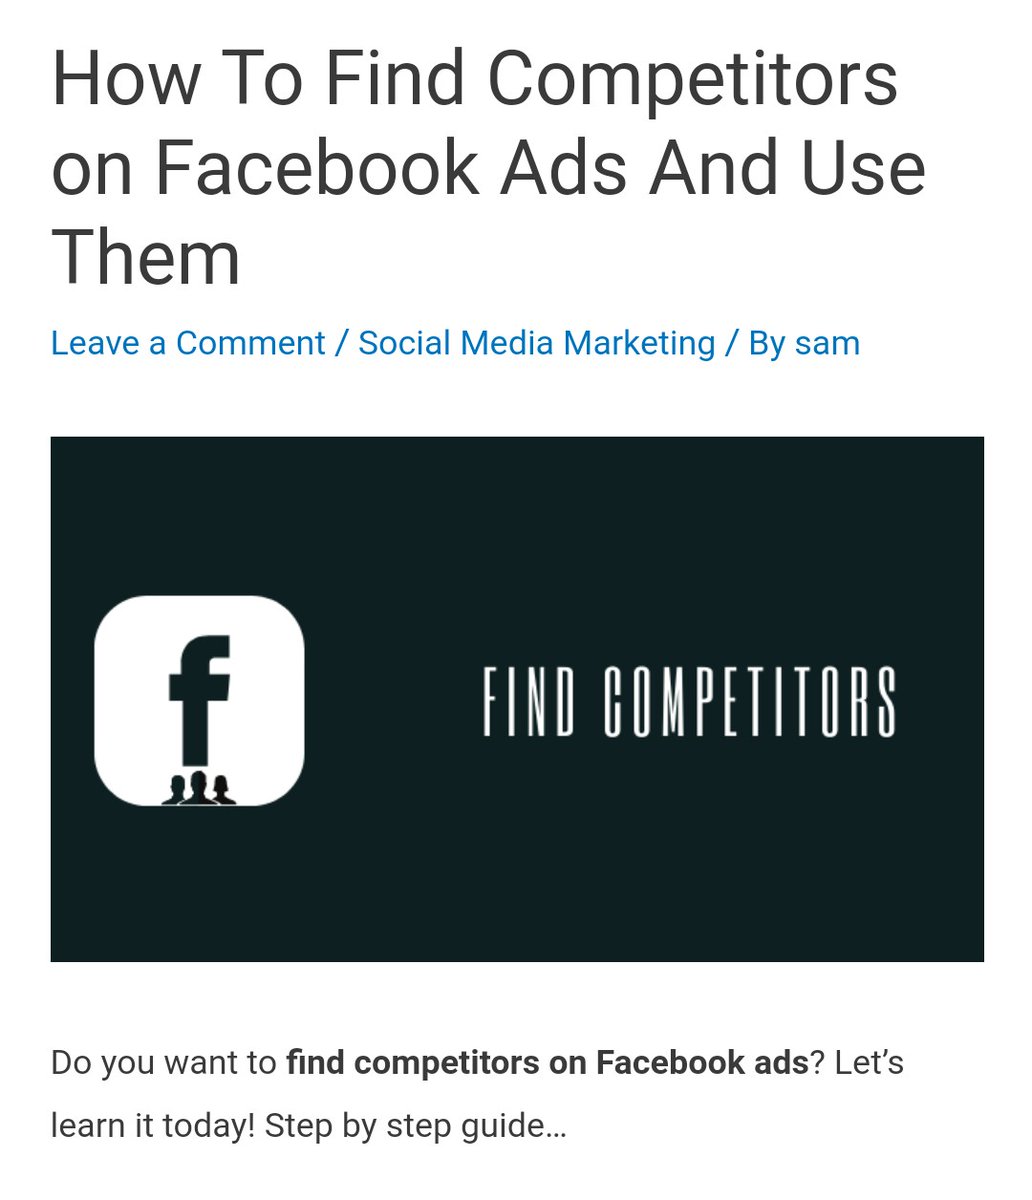 Do you want to know how to find competitors on Facebook ads?
Let's check out this post
#facebookads #facebookmarketing #facebookadstips #facebookadsmarketing #socialmediamarketing #socialmediamarketingtips #digitalmarketingtips 
samdigitalworld.in/how-to-find-co…